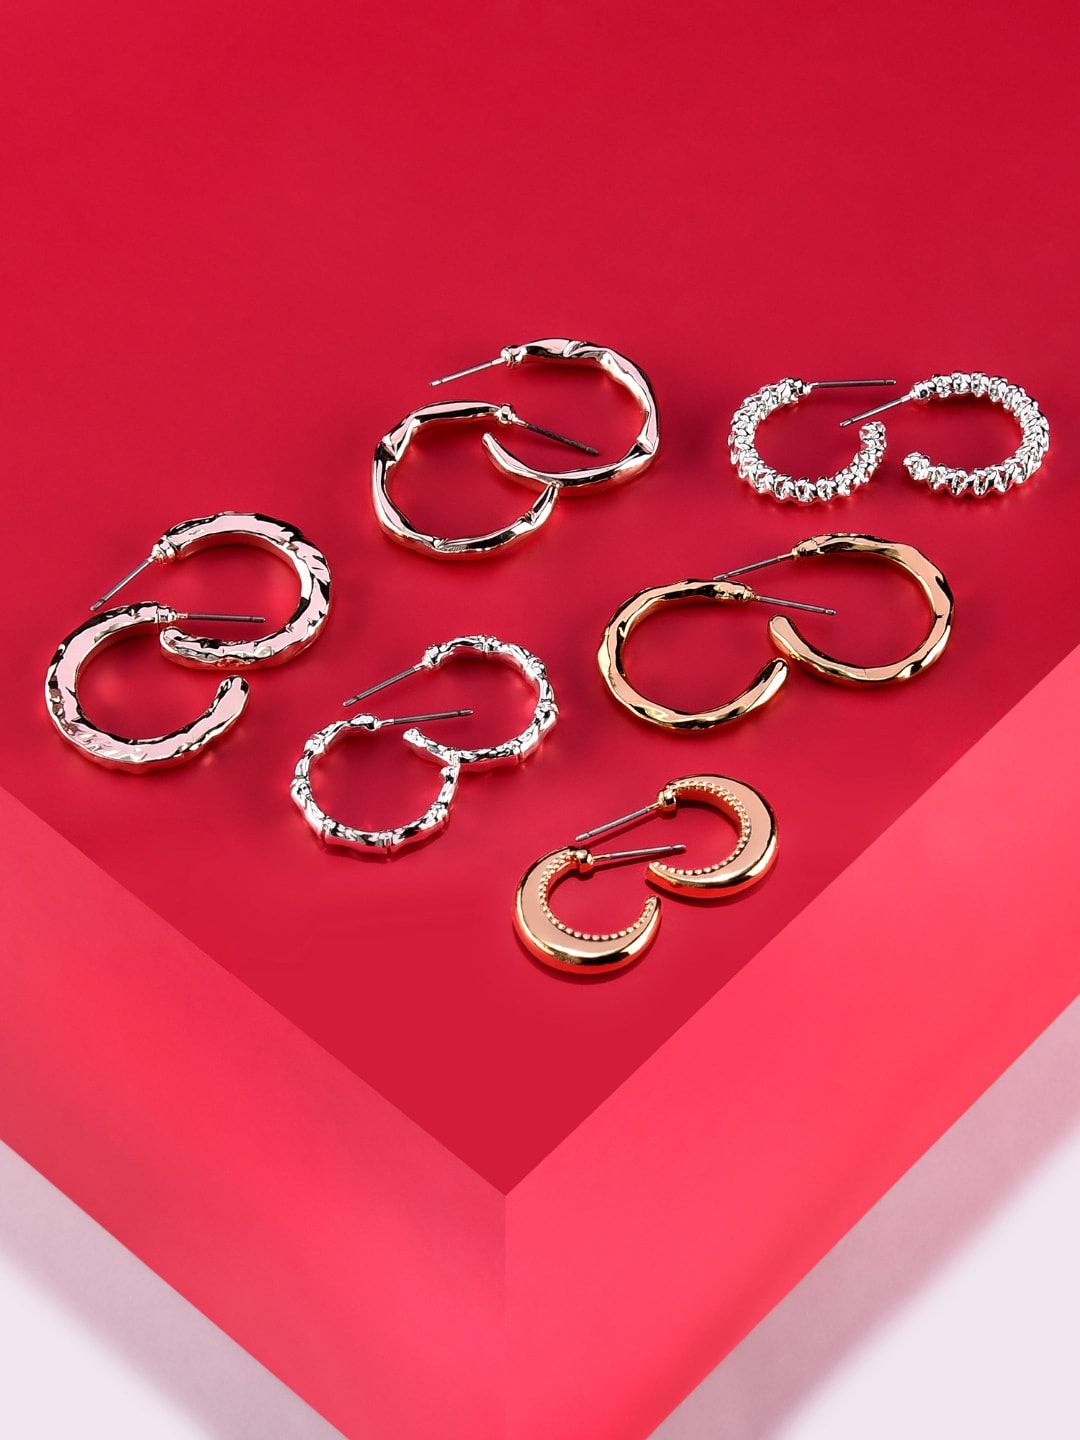 AMI Set of 6 Rose Gold-Plated & Silver-Toned Half Hoop Earrings Price in India